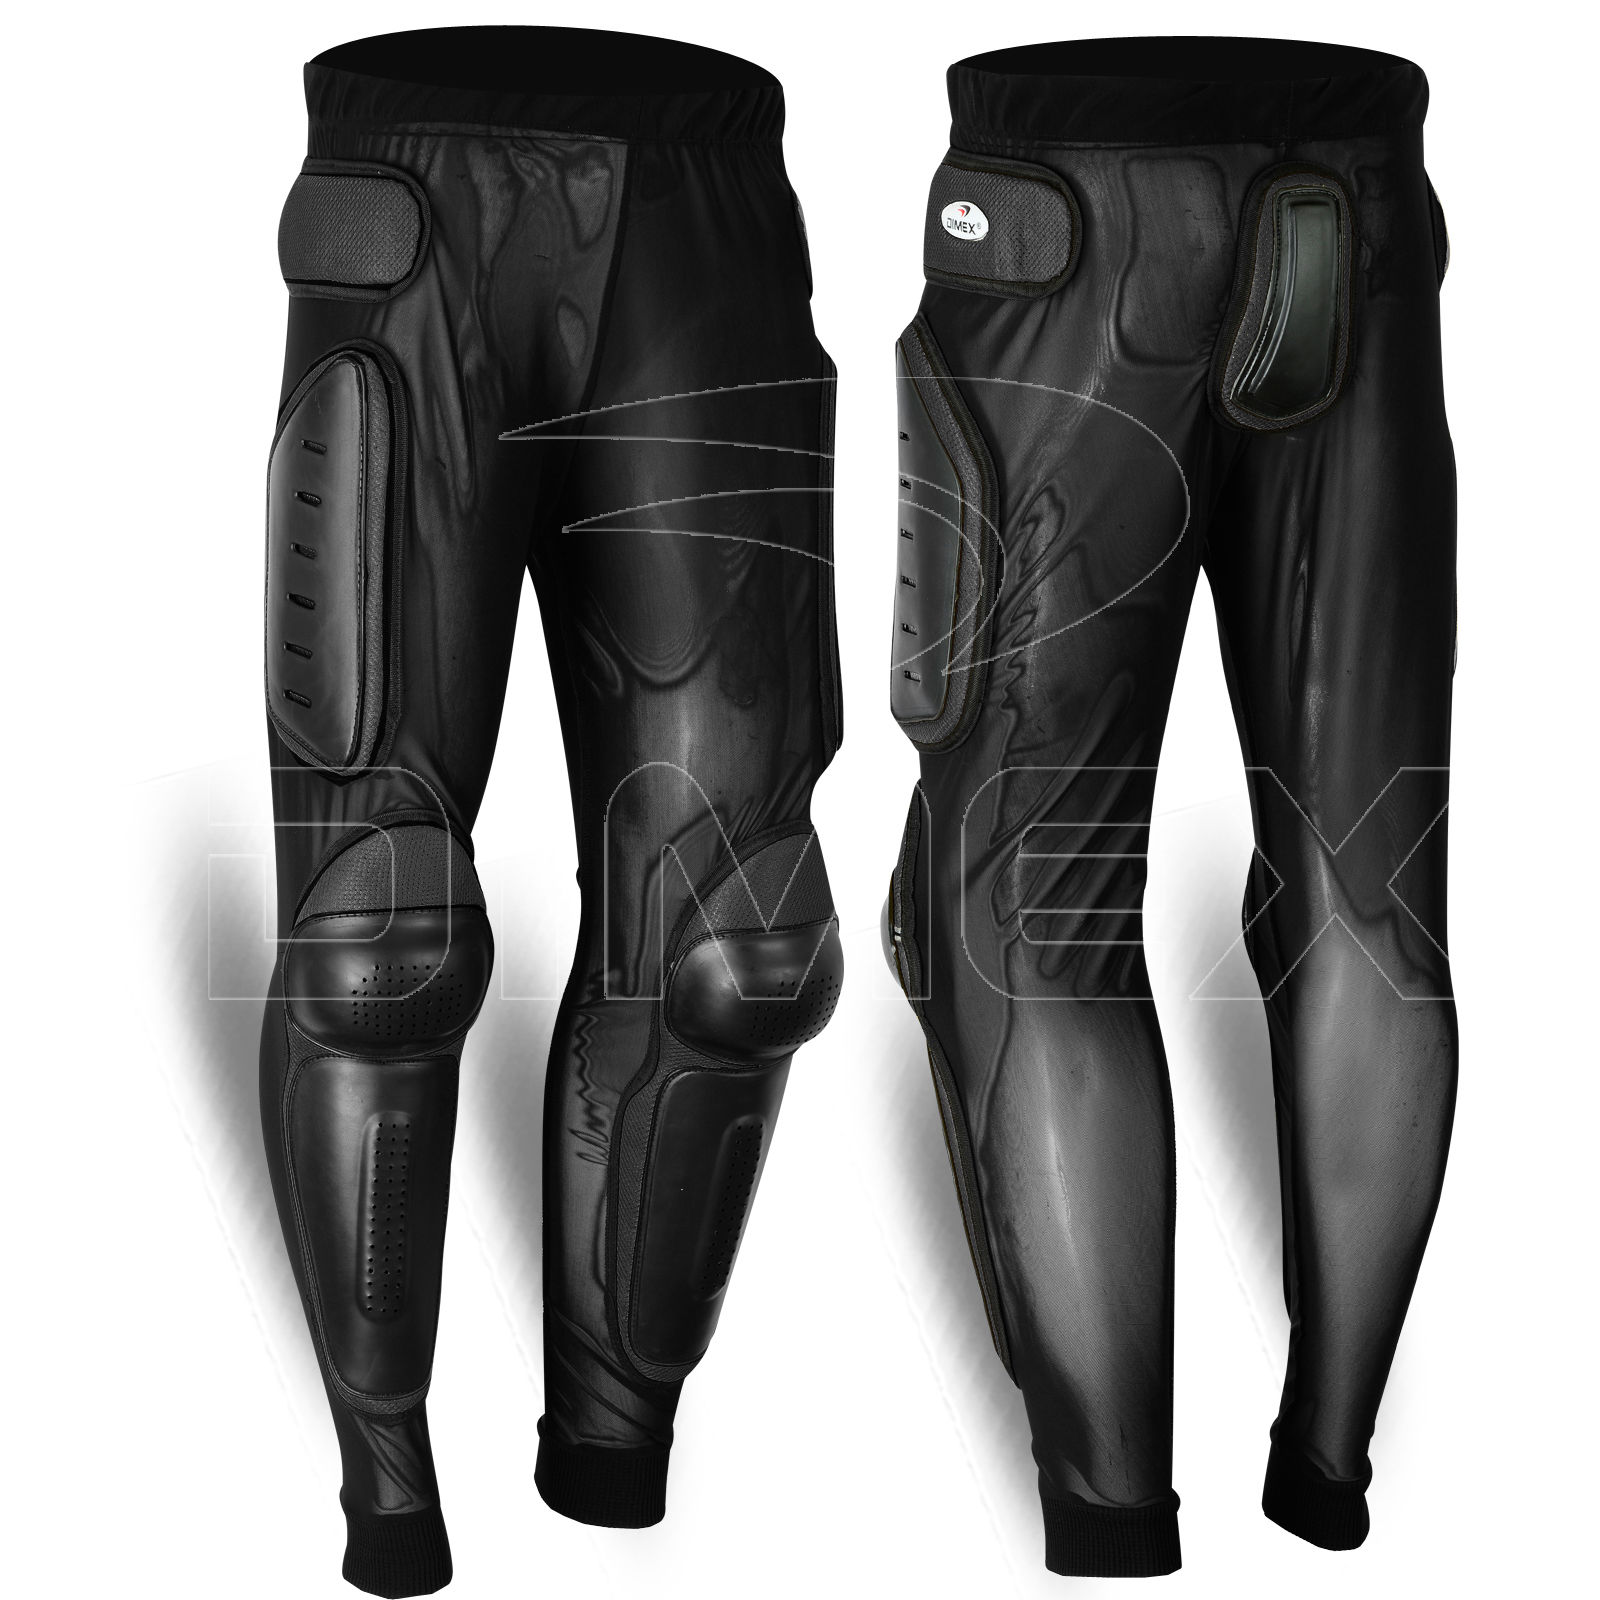 Body Armour Motorcycle Motorbike Trouser Snowbaords Skating Pants Mx Protection Ebay